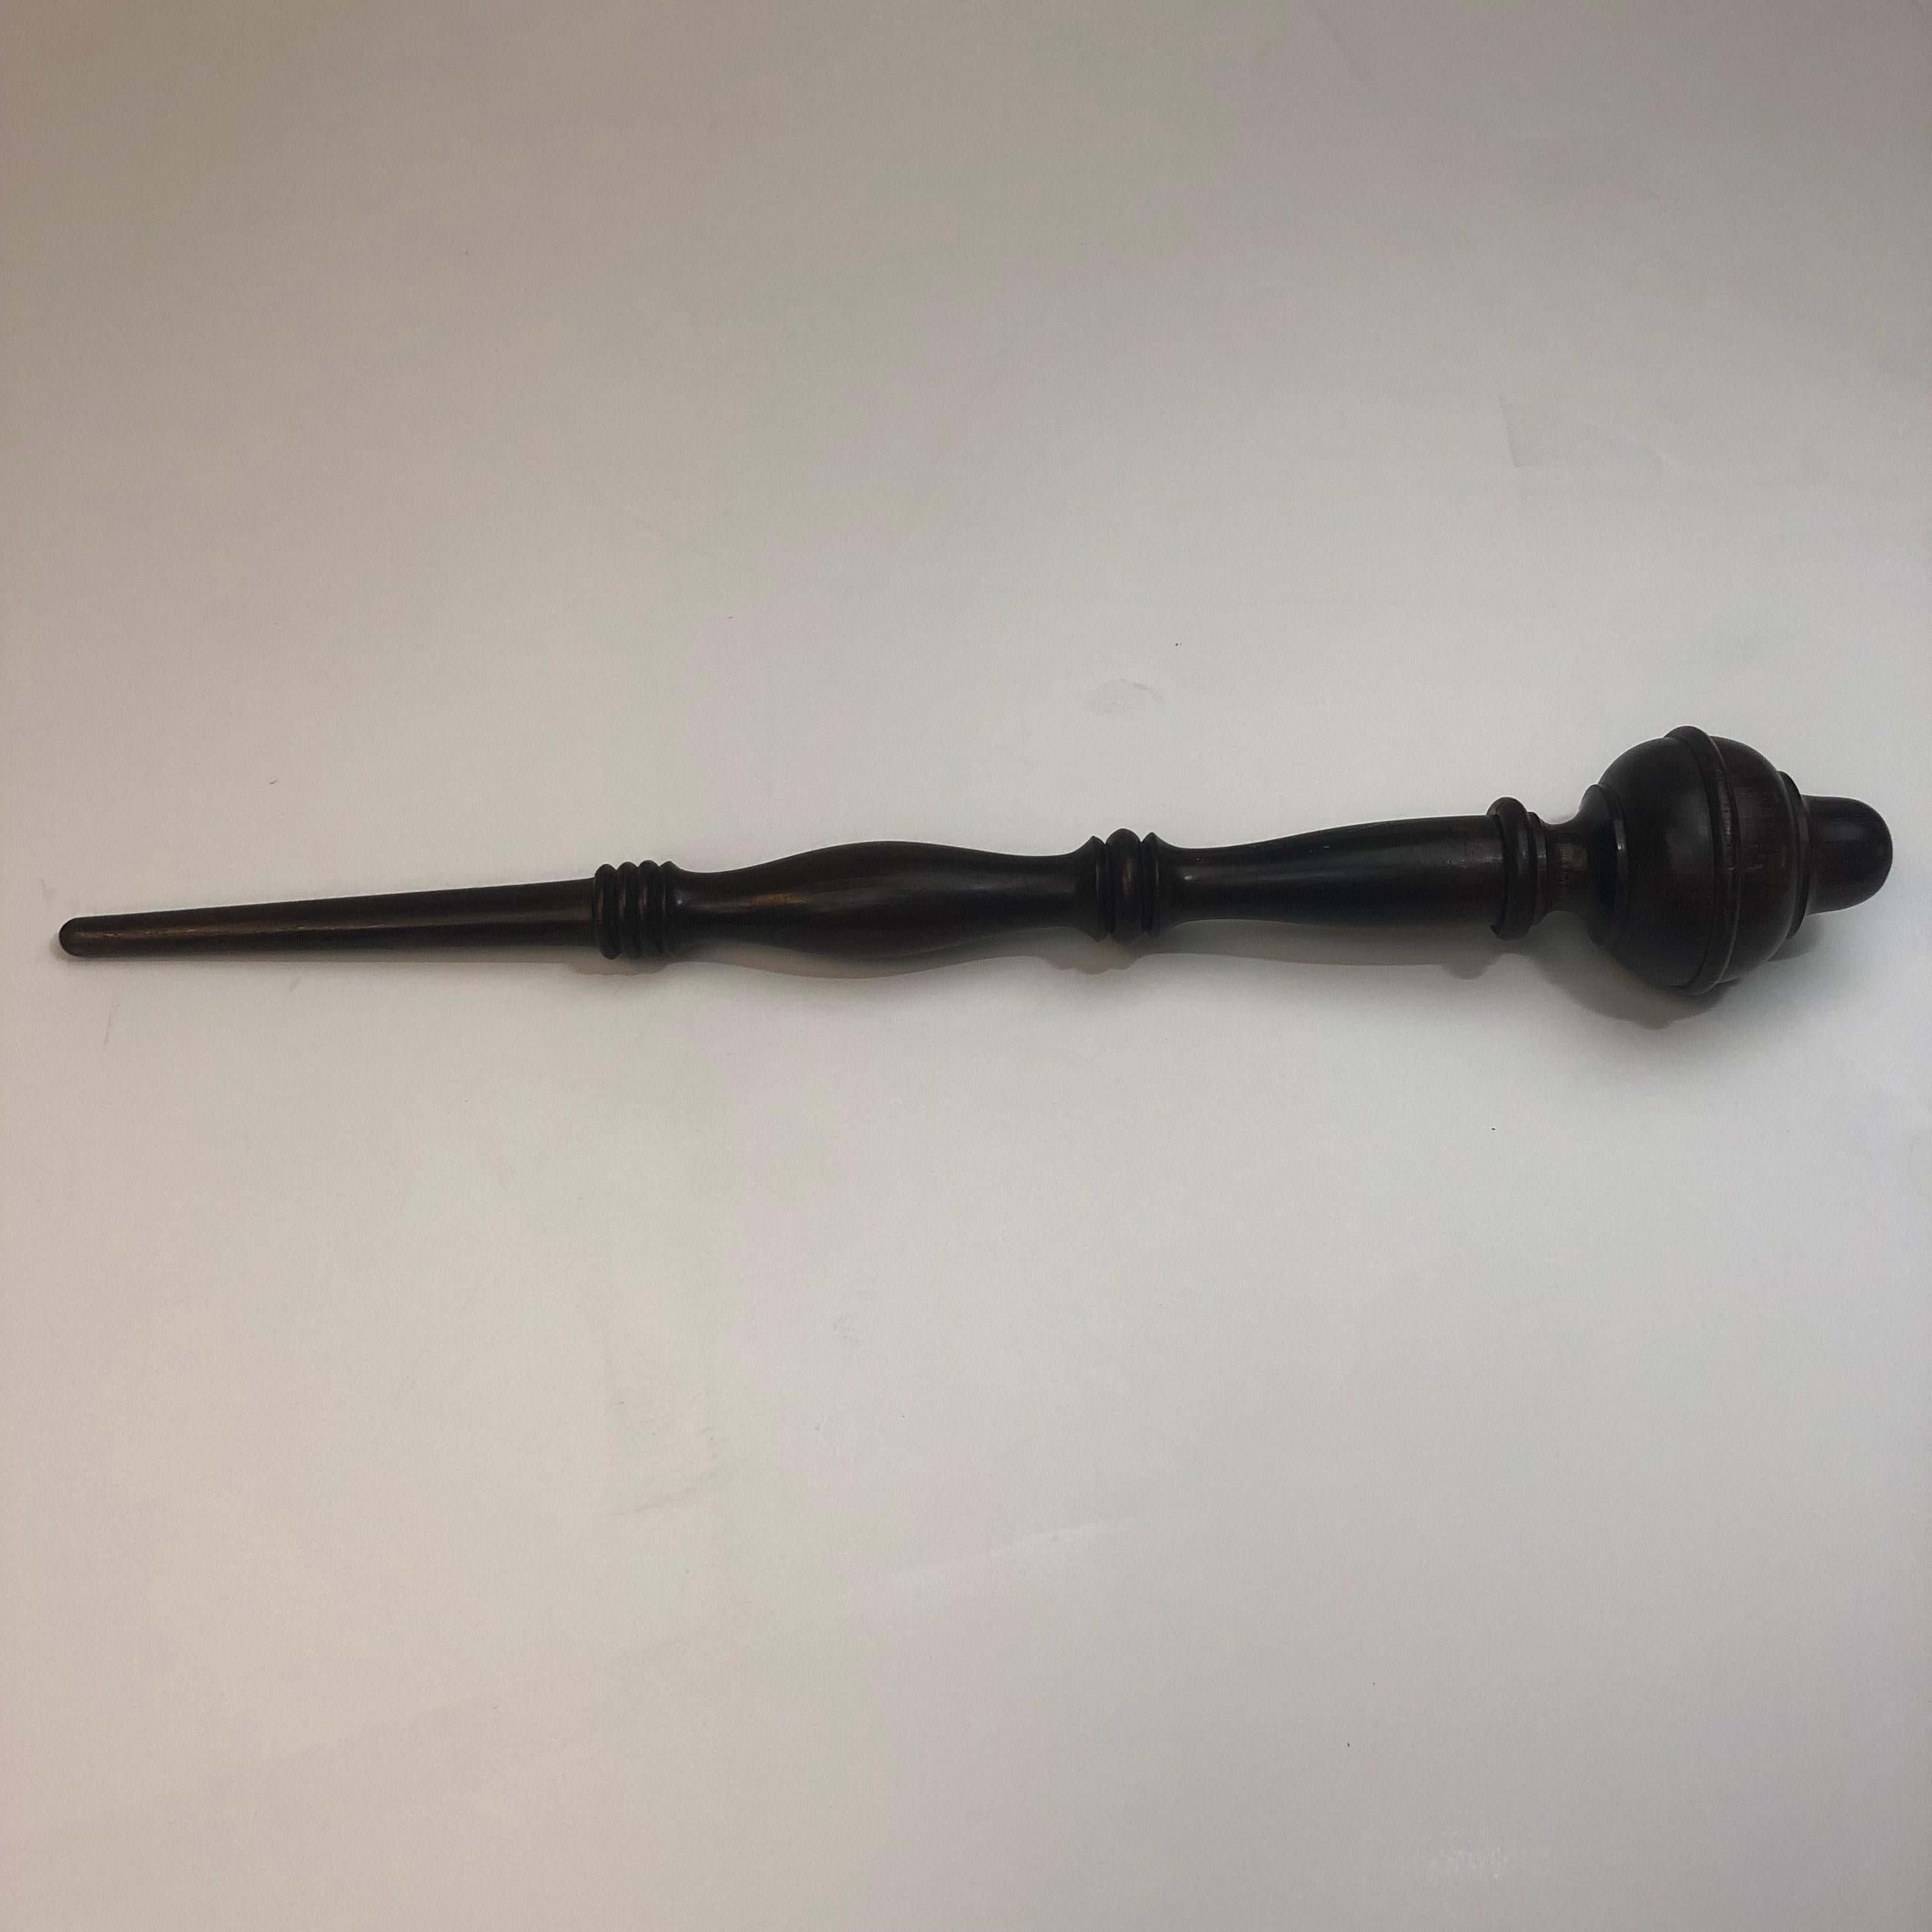 A complicated and finely turned and finished vintage dark walnut scepter/wand produced most likely to showcase the variety of radius arcs and knurling's the wood shop was capable of producing. This is a two piece production consisting of the turned